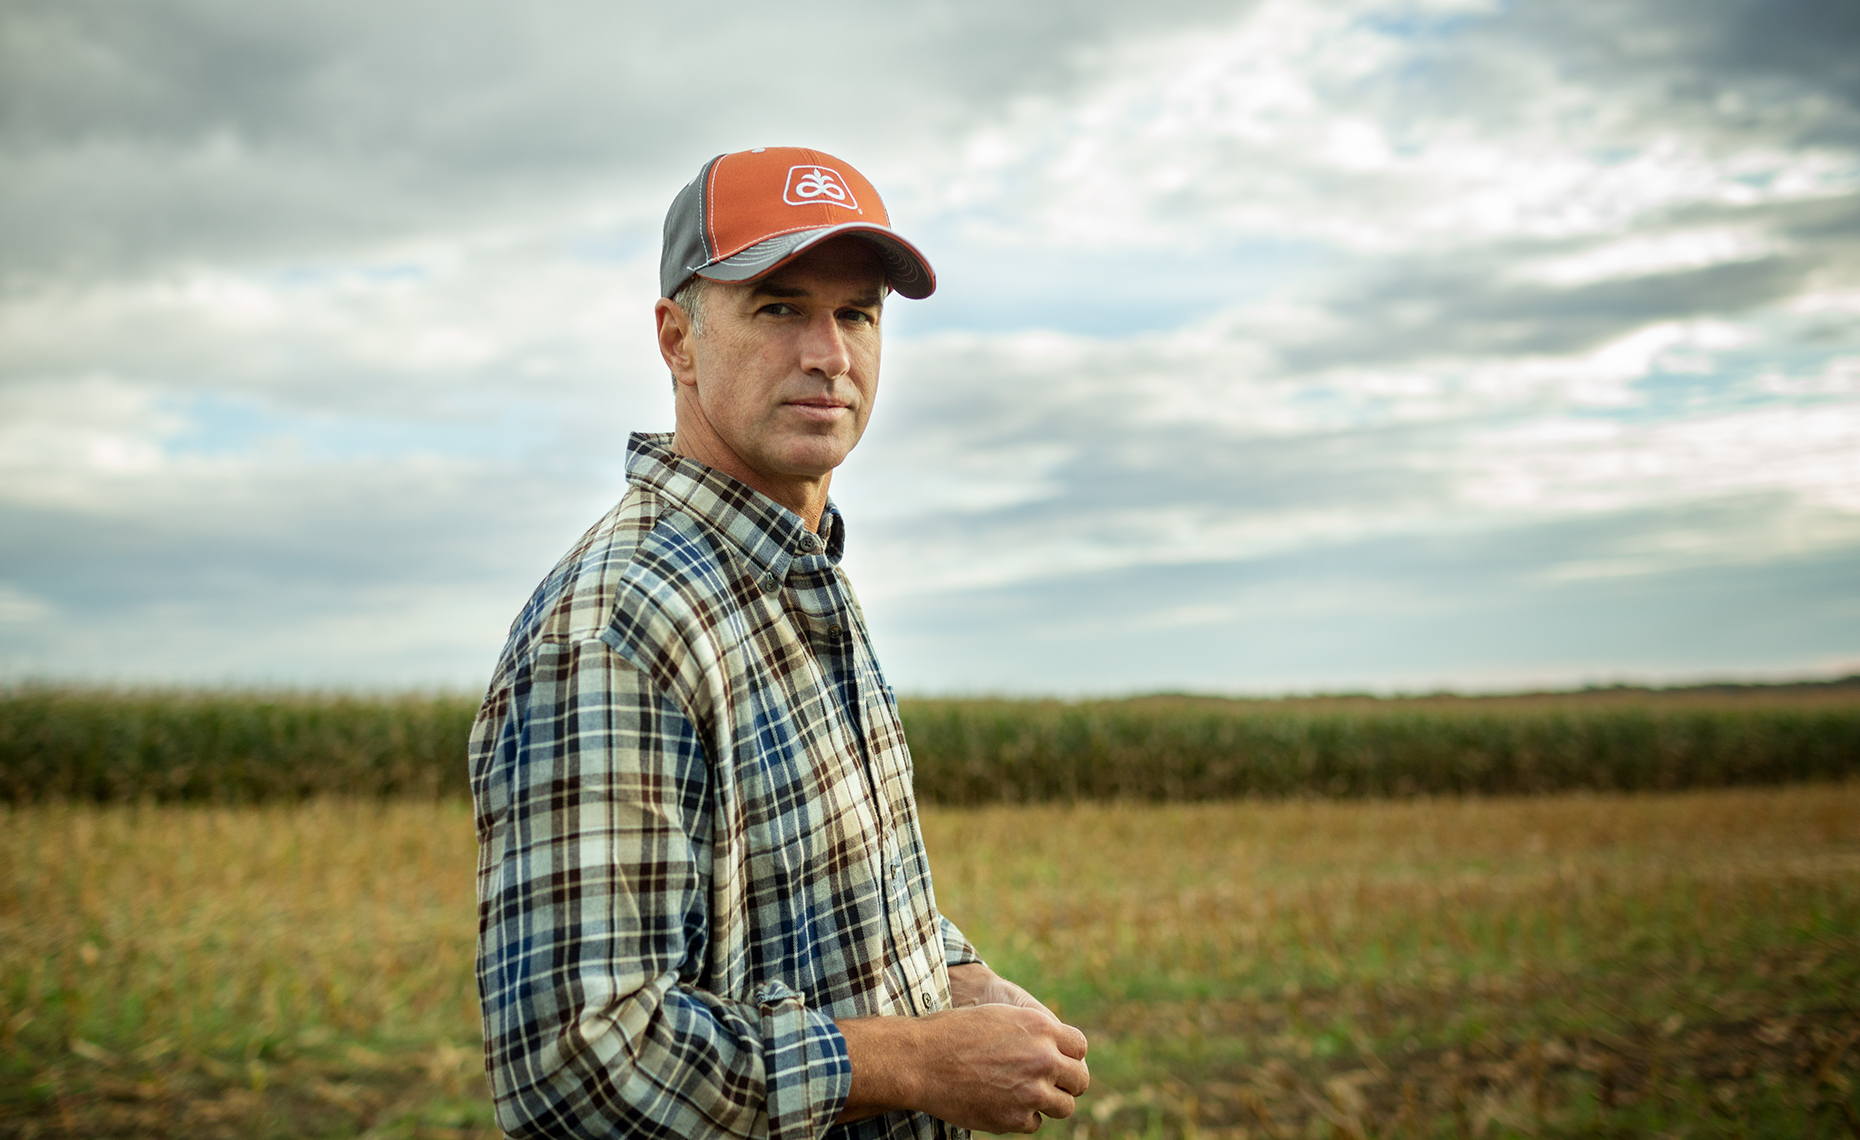 Rubinstein Photographer + Director| Agriculture |Minneapolis, Minnesota Advertising, Editorial, Portrait and Corporate  Photographer | Photojournalism | Storytelling